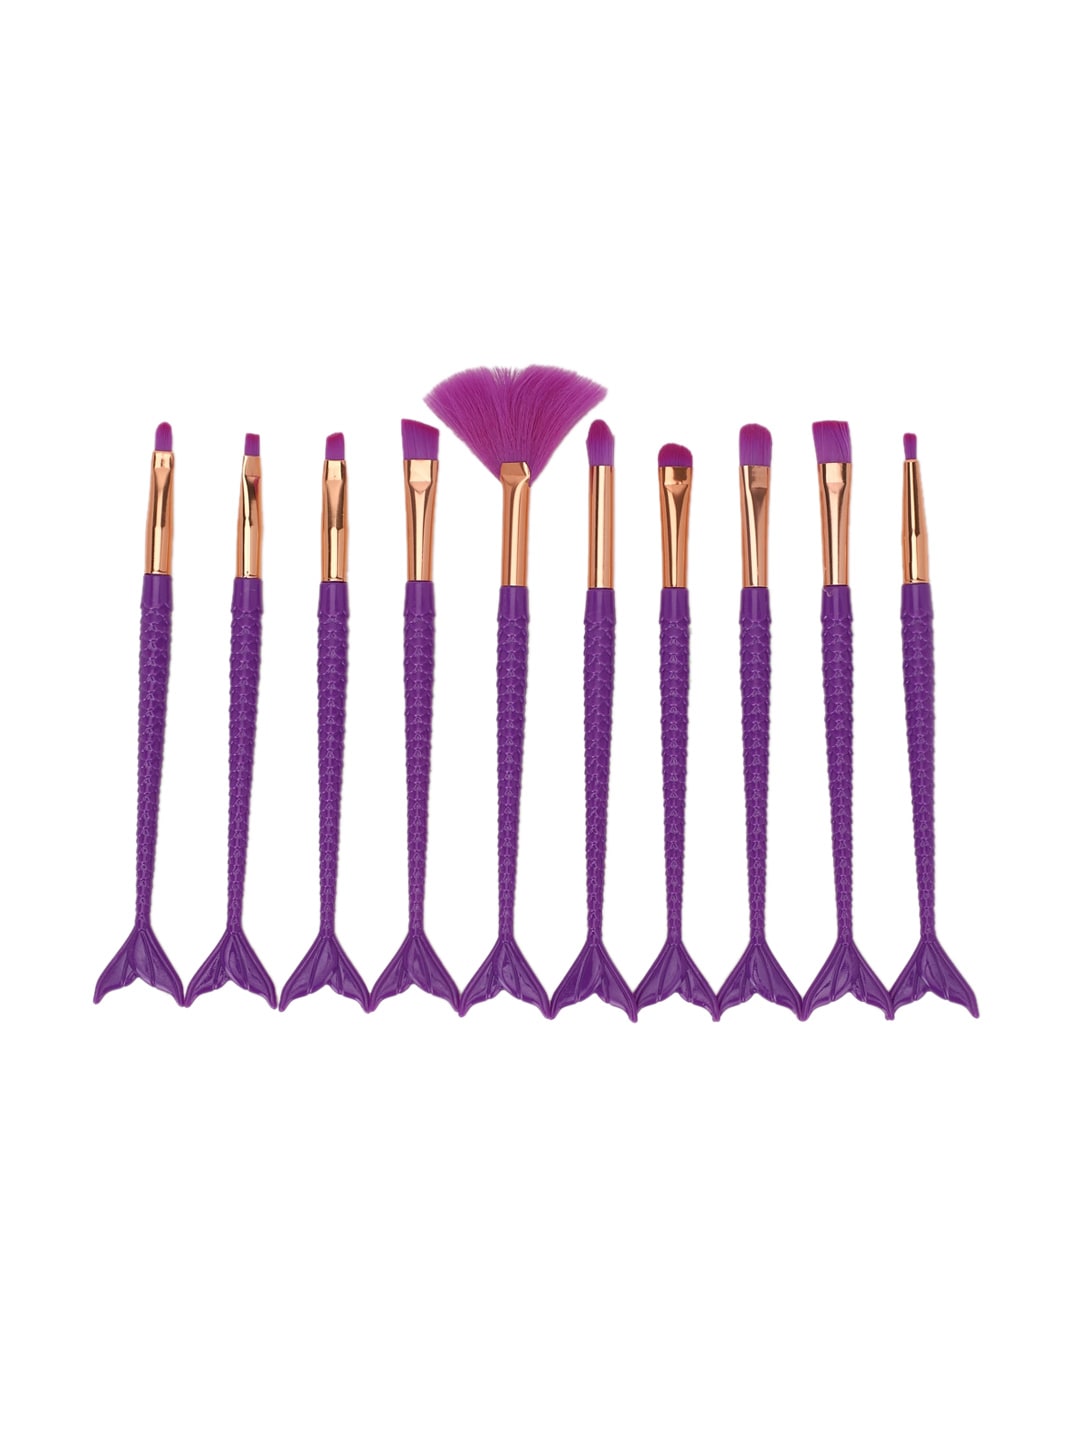 FOREVER 21 Purple Set of 10 Make Brushes Set Price in India